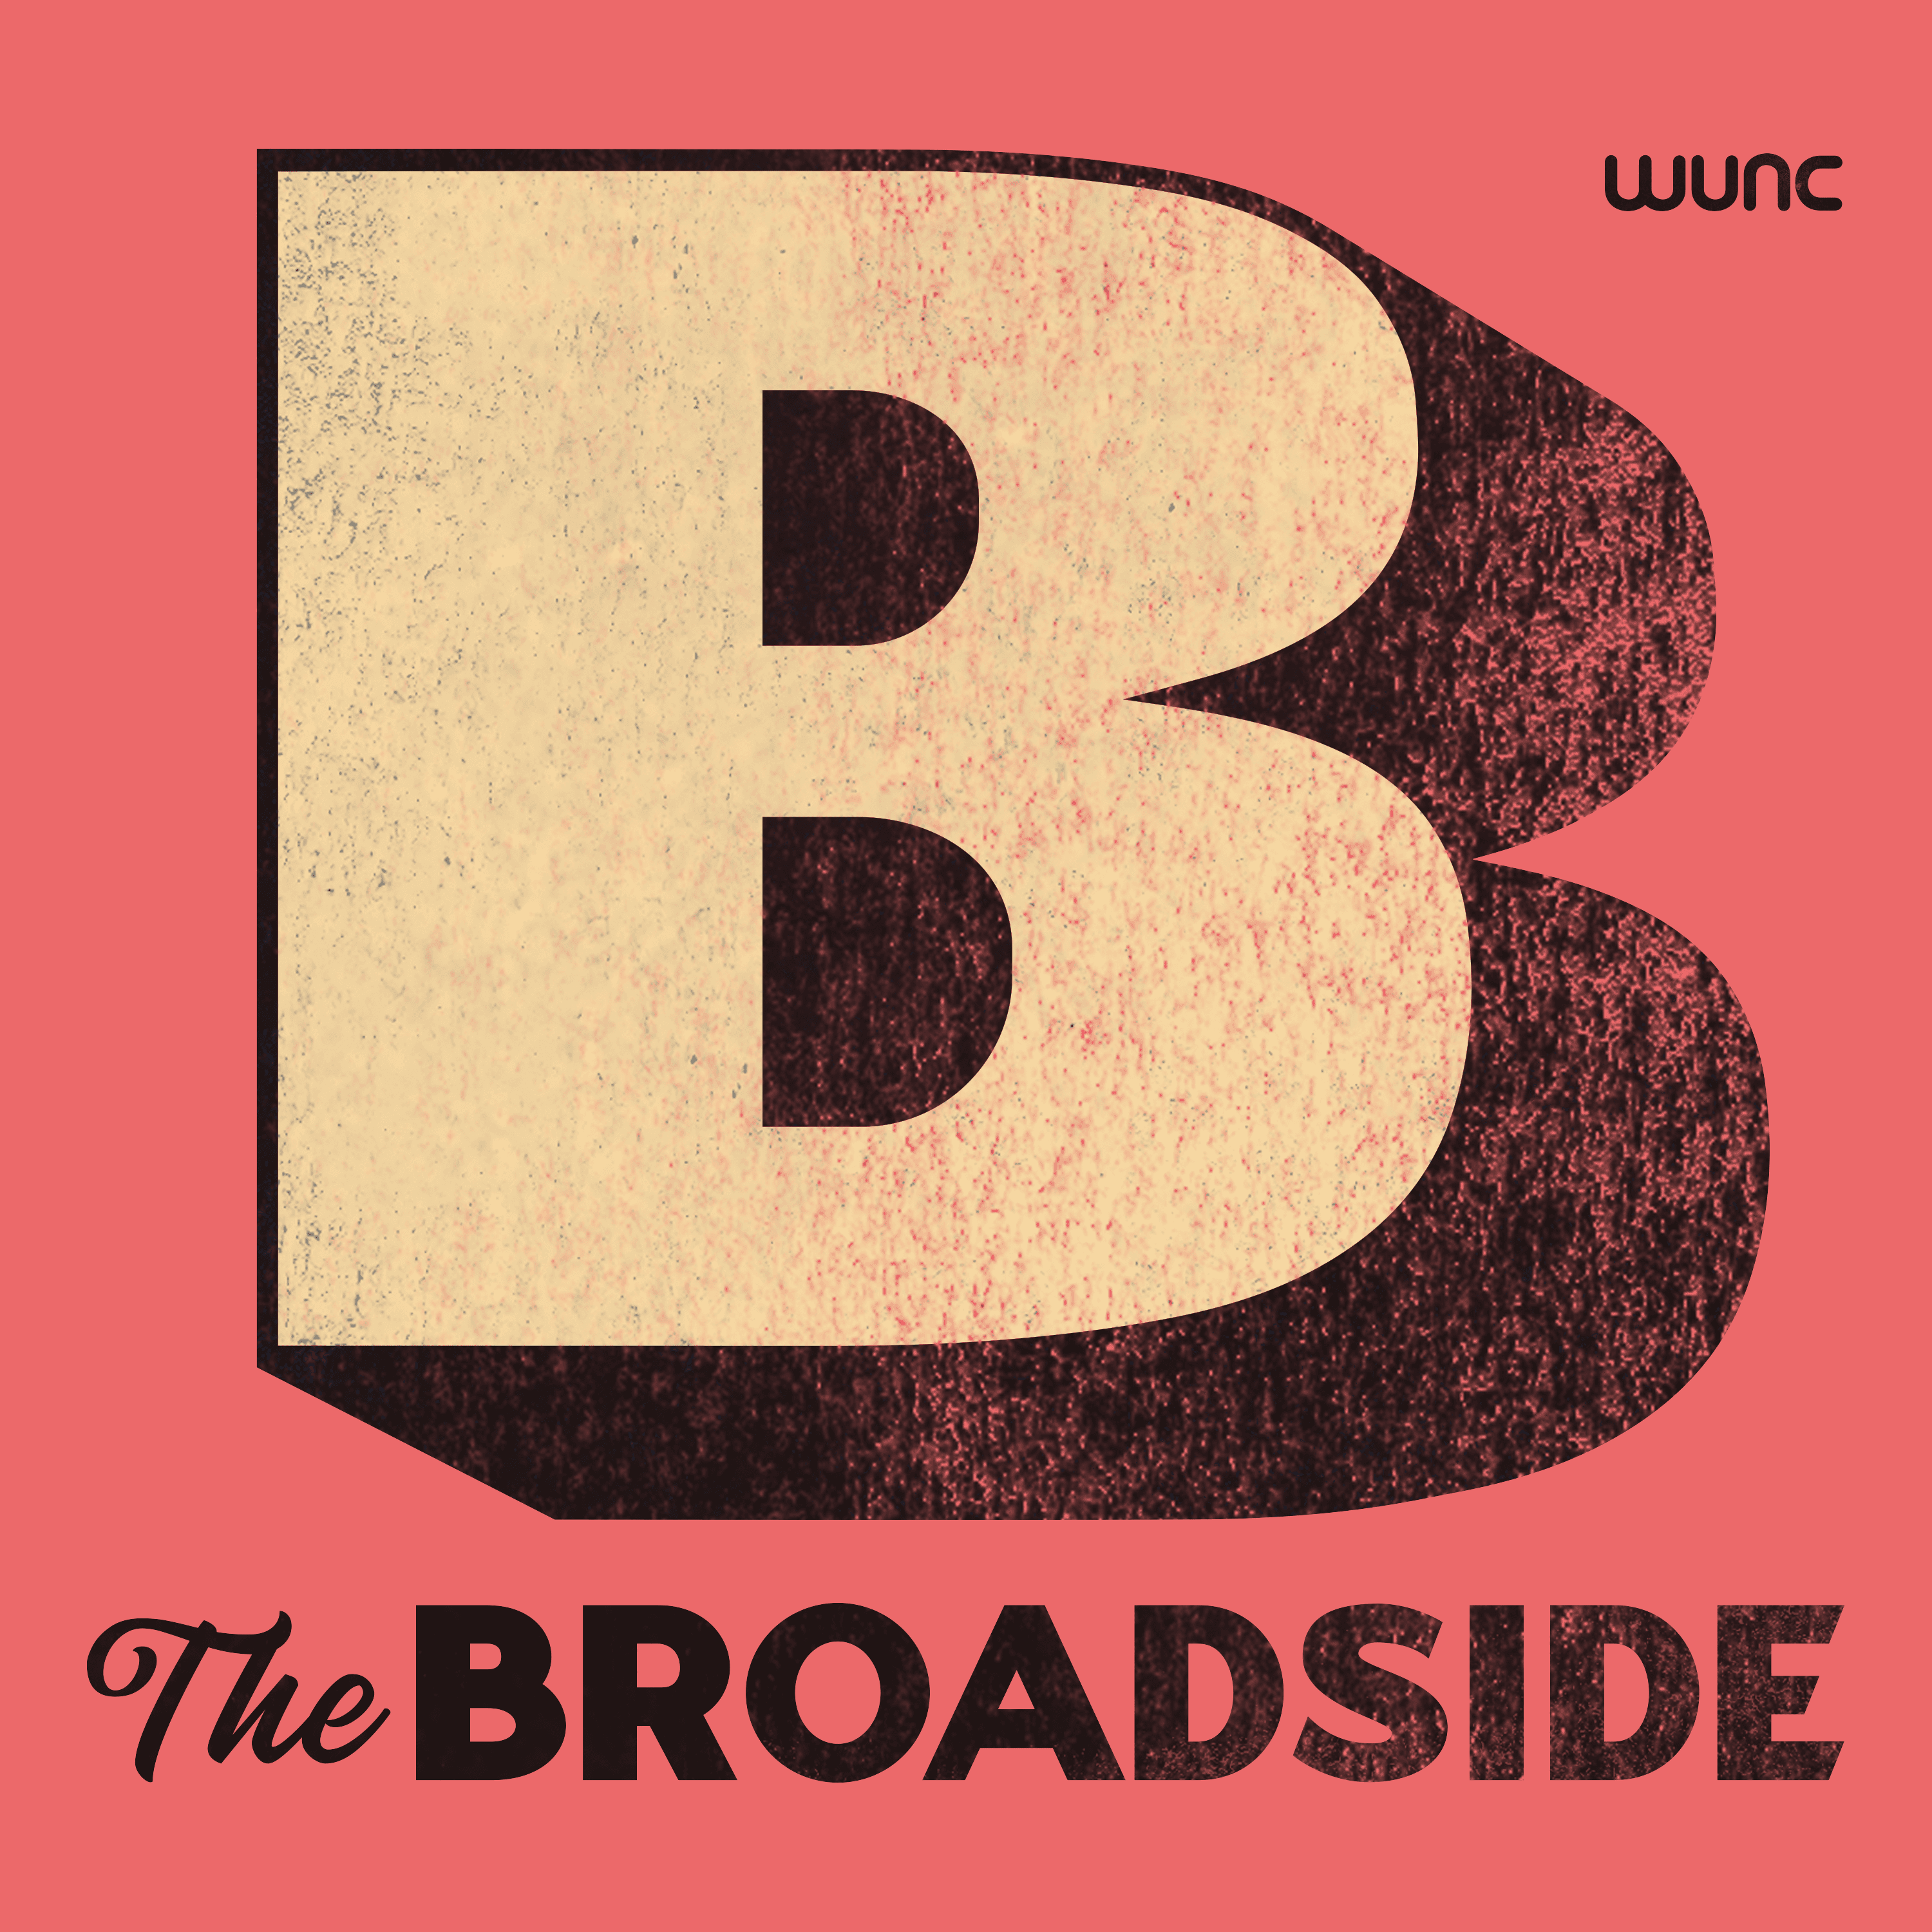 Thumbnail for "Introducing: The Broadside".